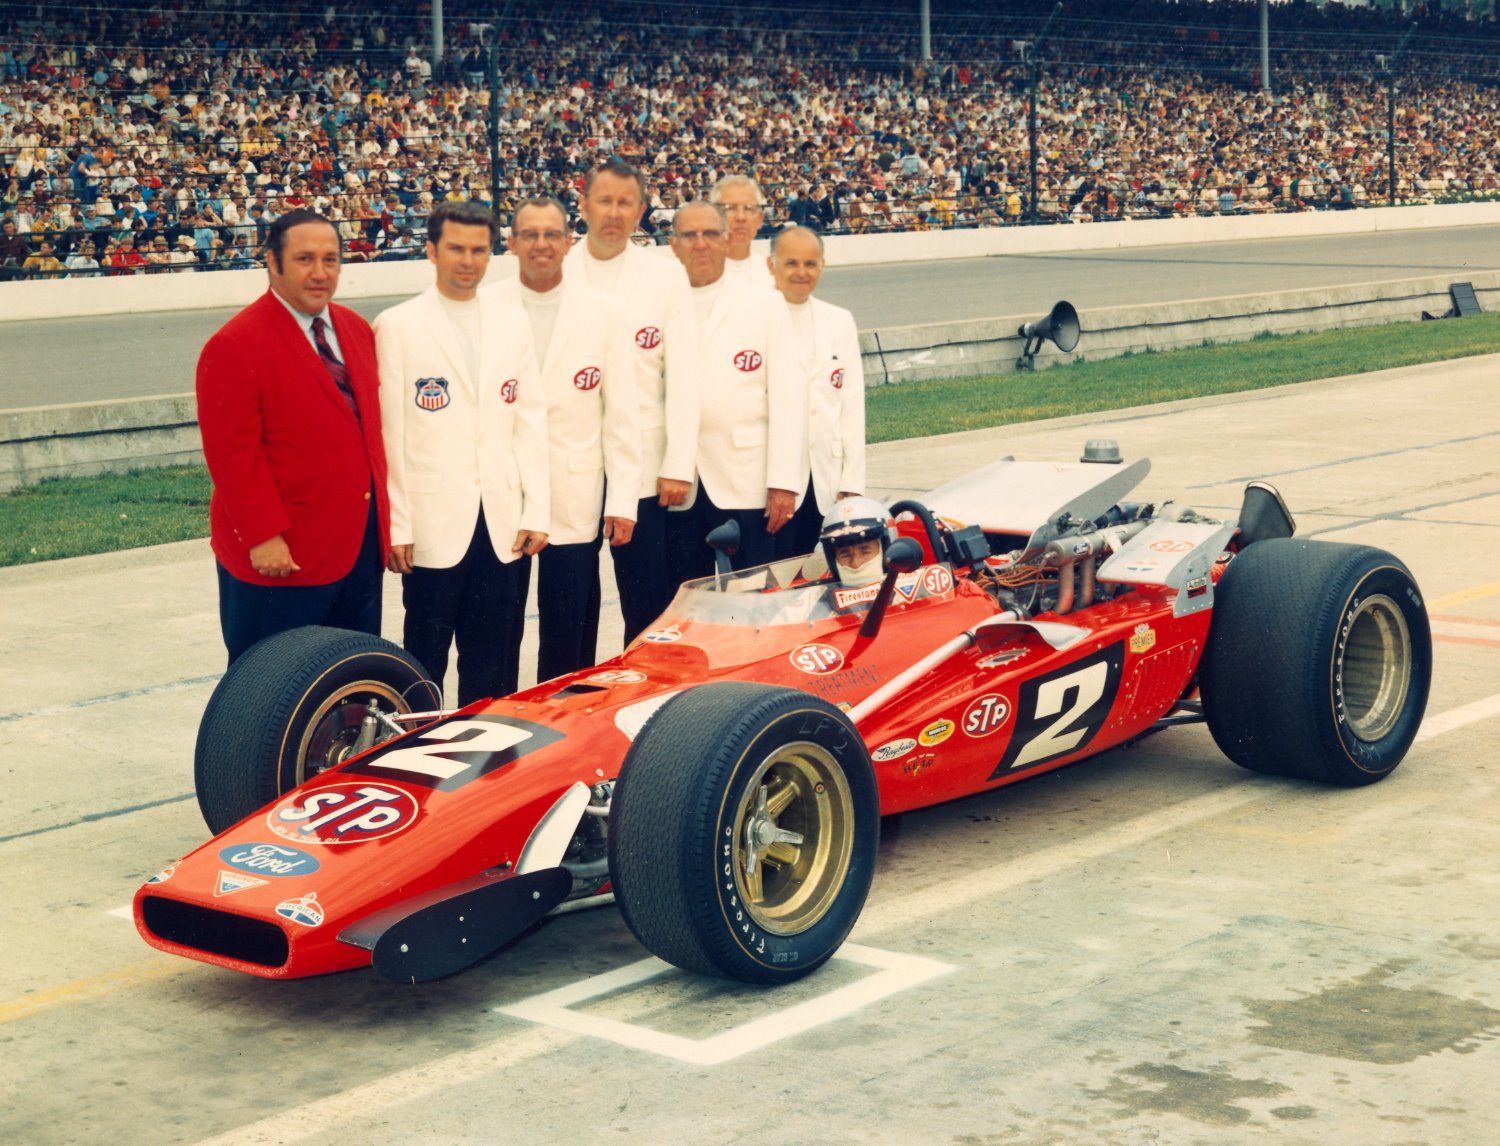 1969 Indianapolis 500: Official Race Film